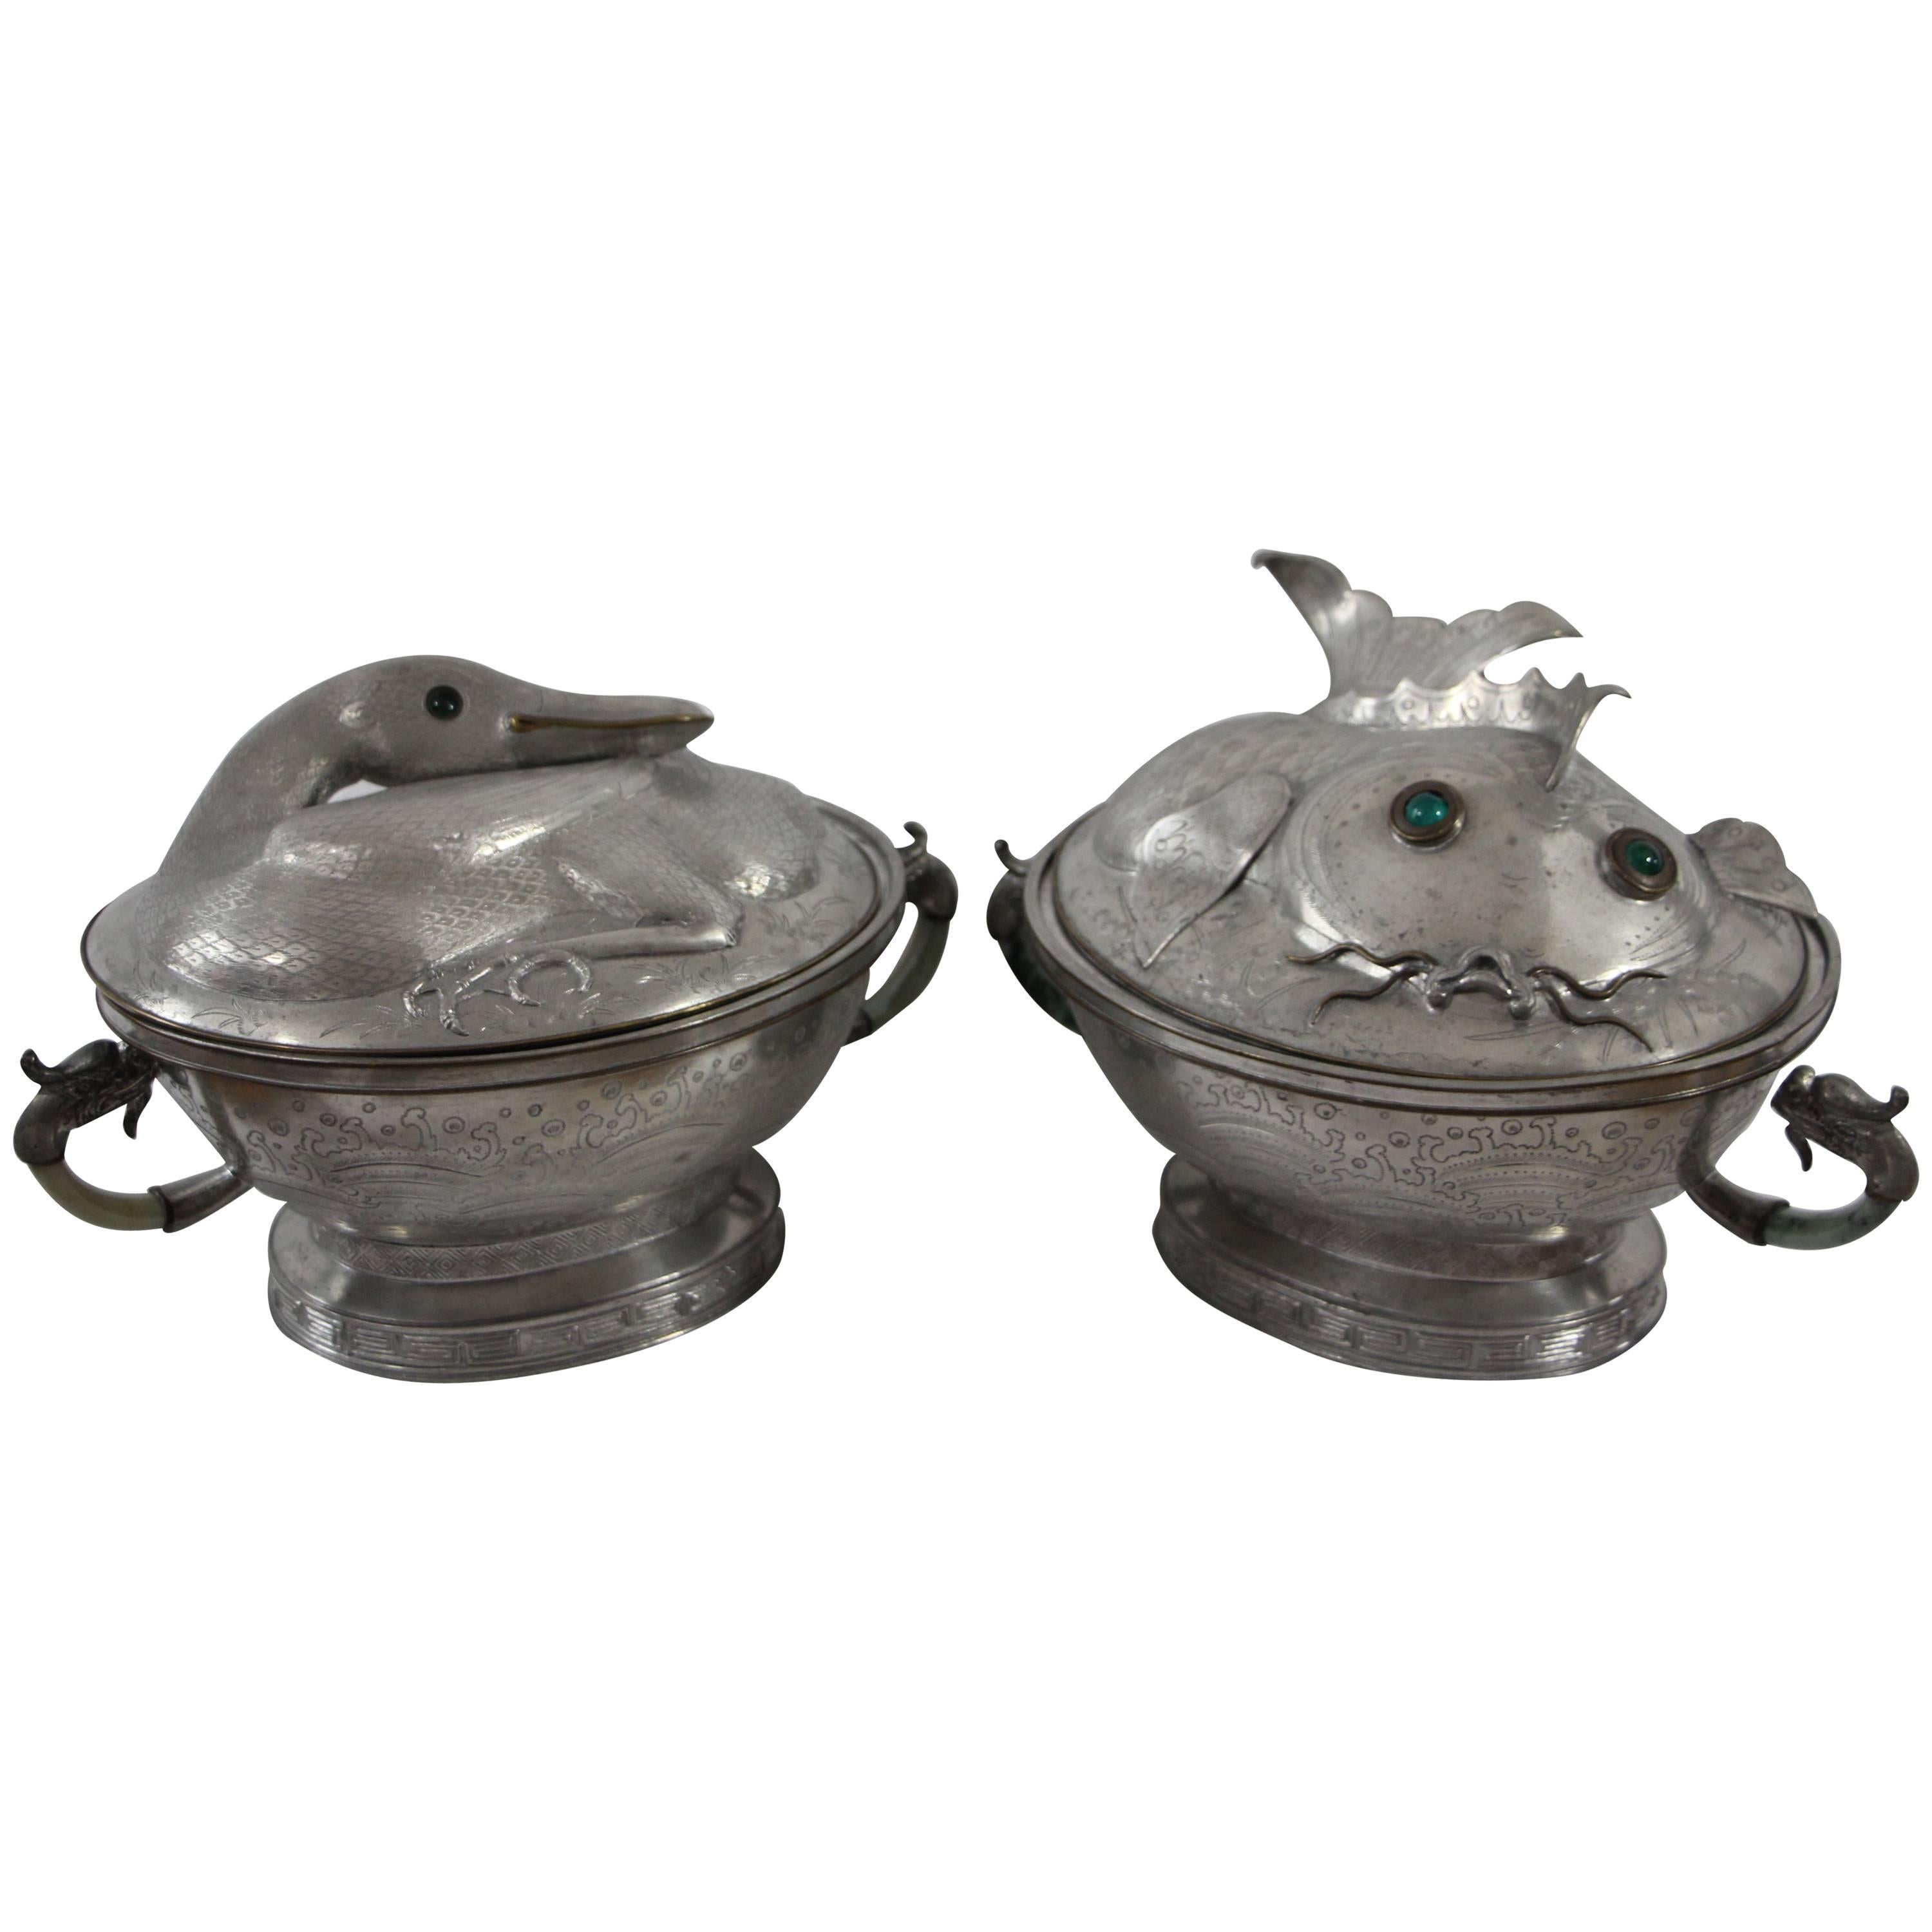 Pair of Chinese Pewter Tureens, Qing Dynasty